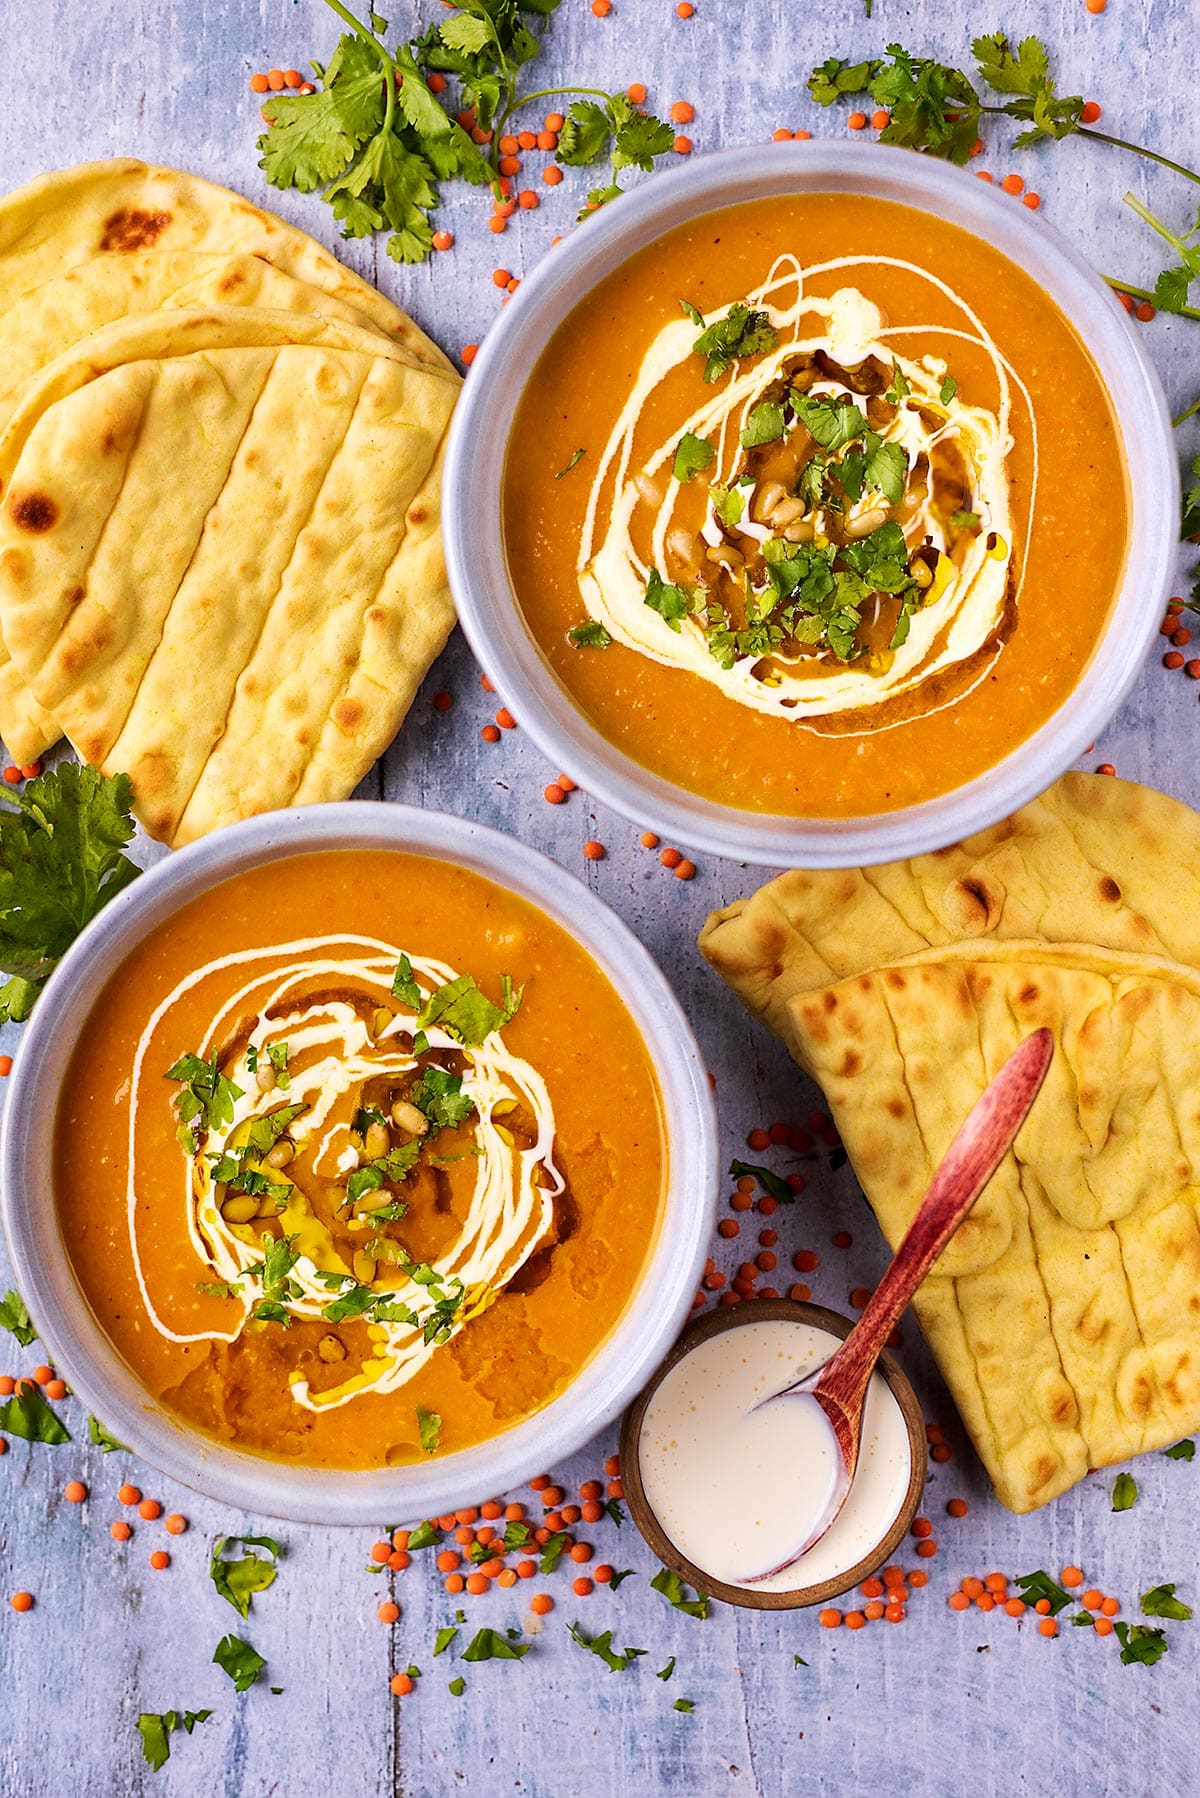 Two bowls of soup next to some flatbreads and a small bowl of cream.